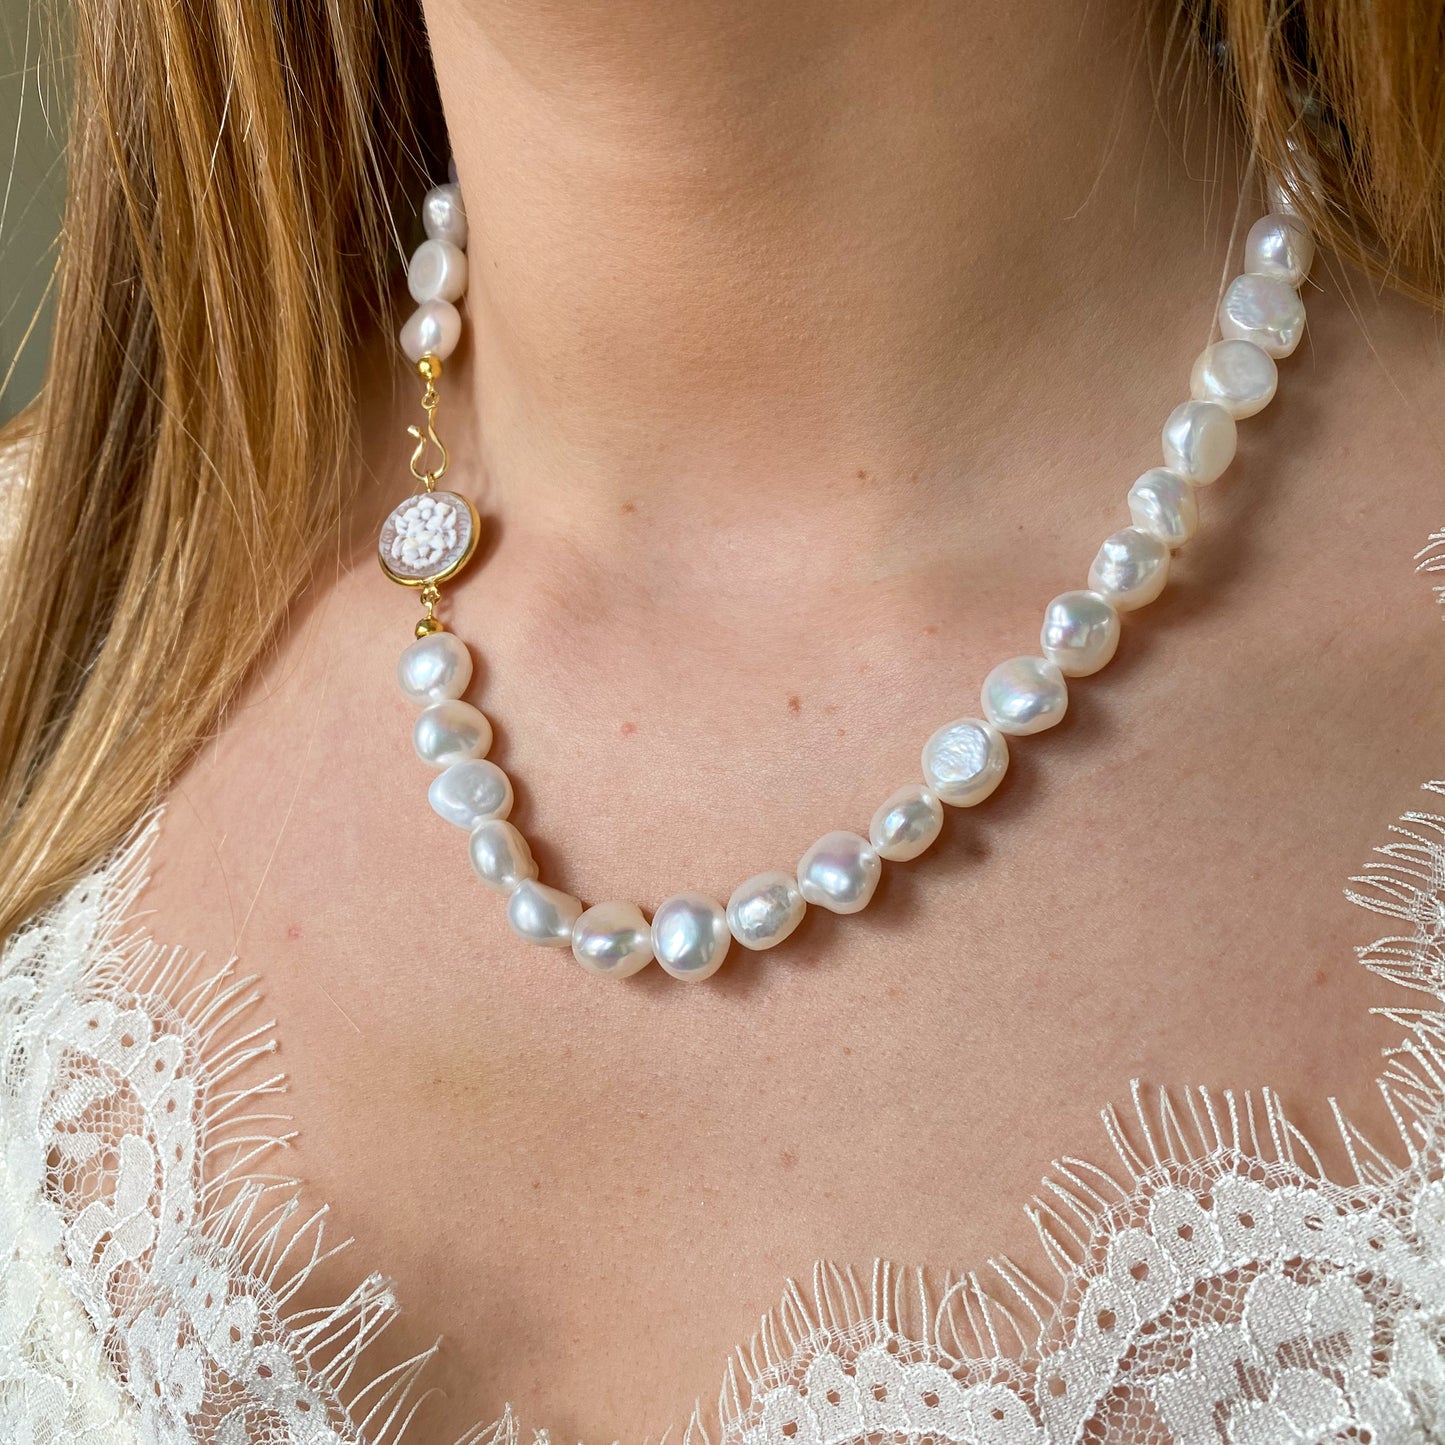 Floral Cameo & Freshwater Pearl Necklace 10mm-12mm | 43cm - John Ross Jewellers